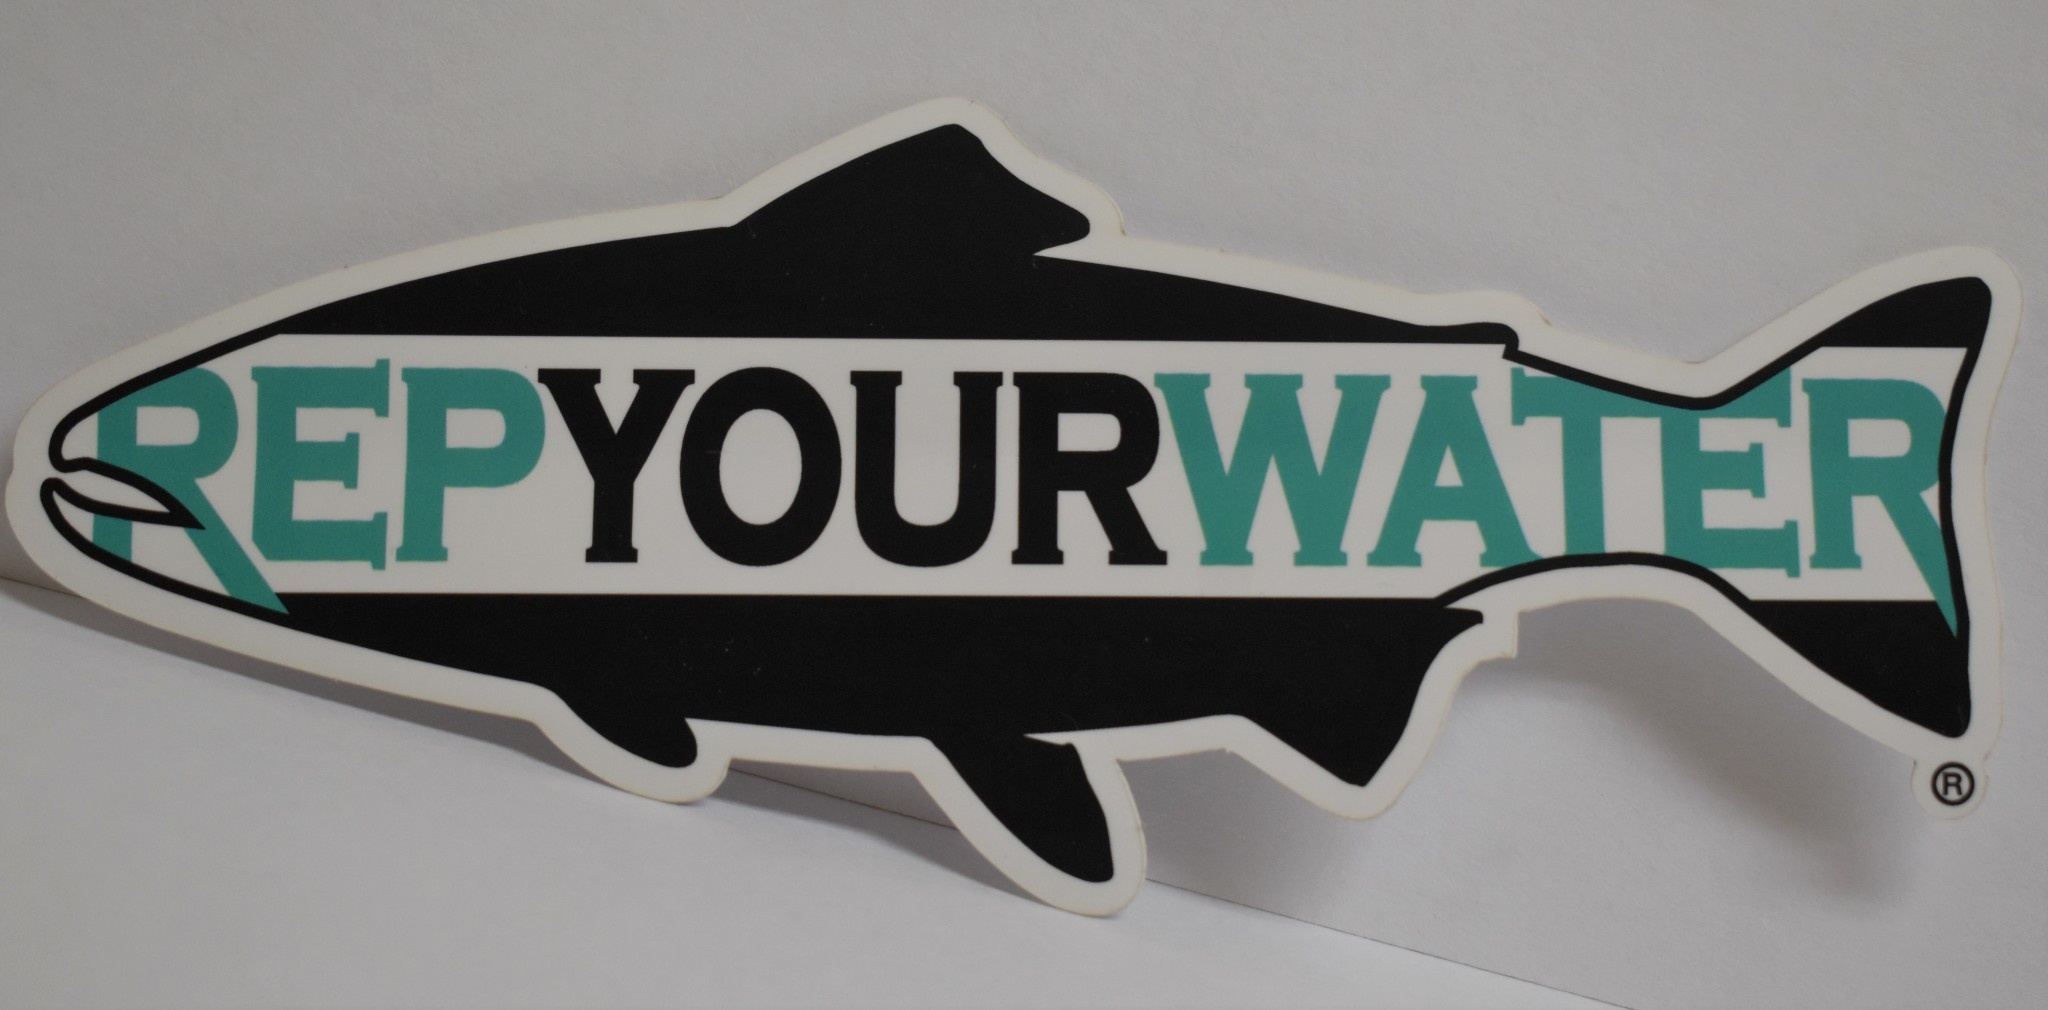 REPYOURWATER Logo Sticker - Total Outfitters